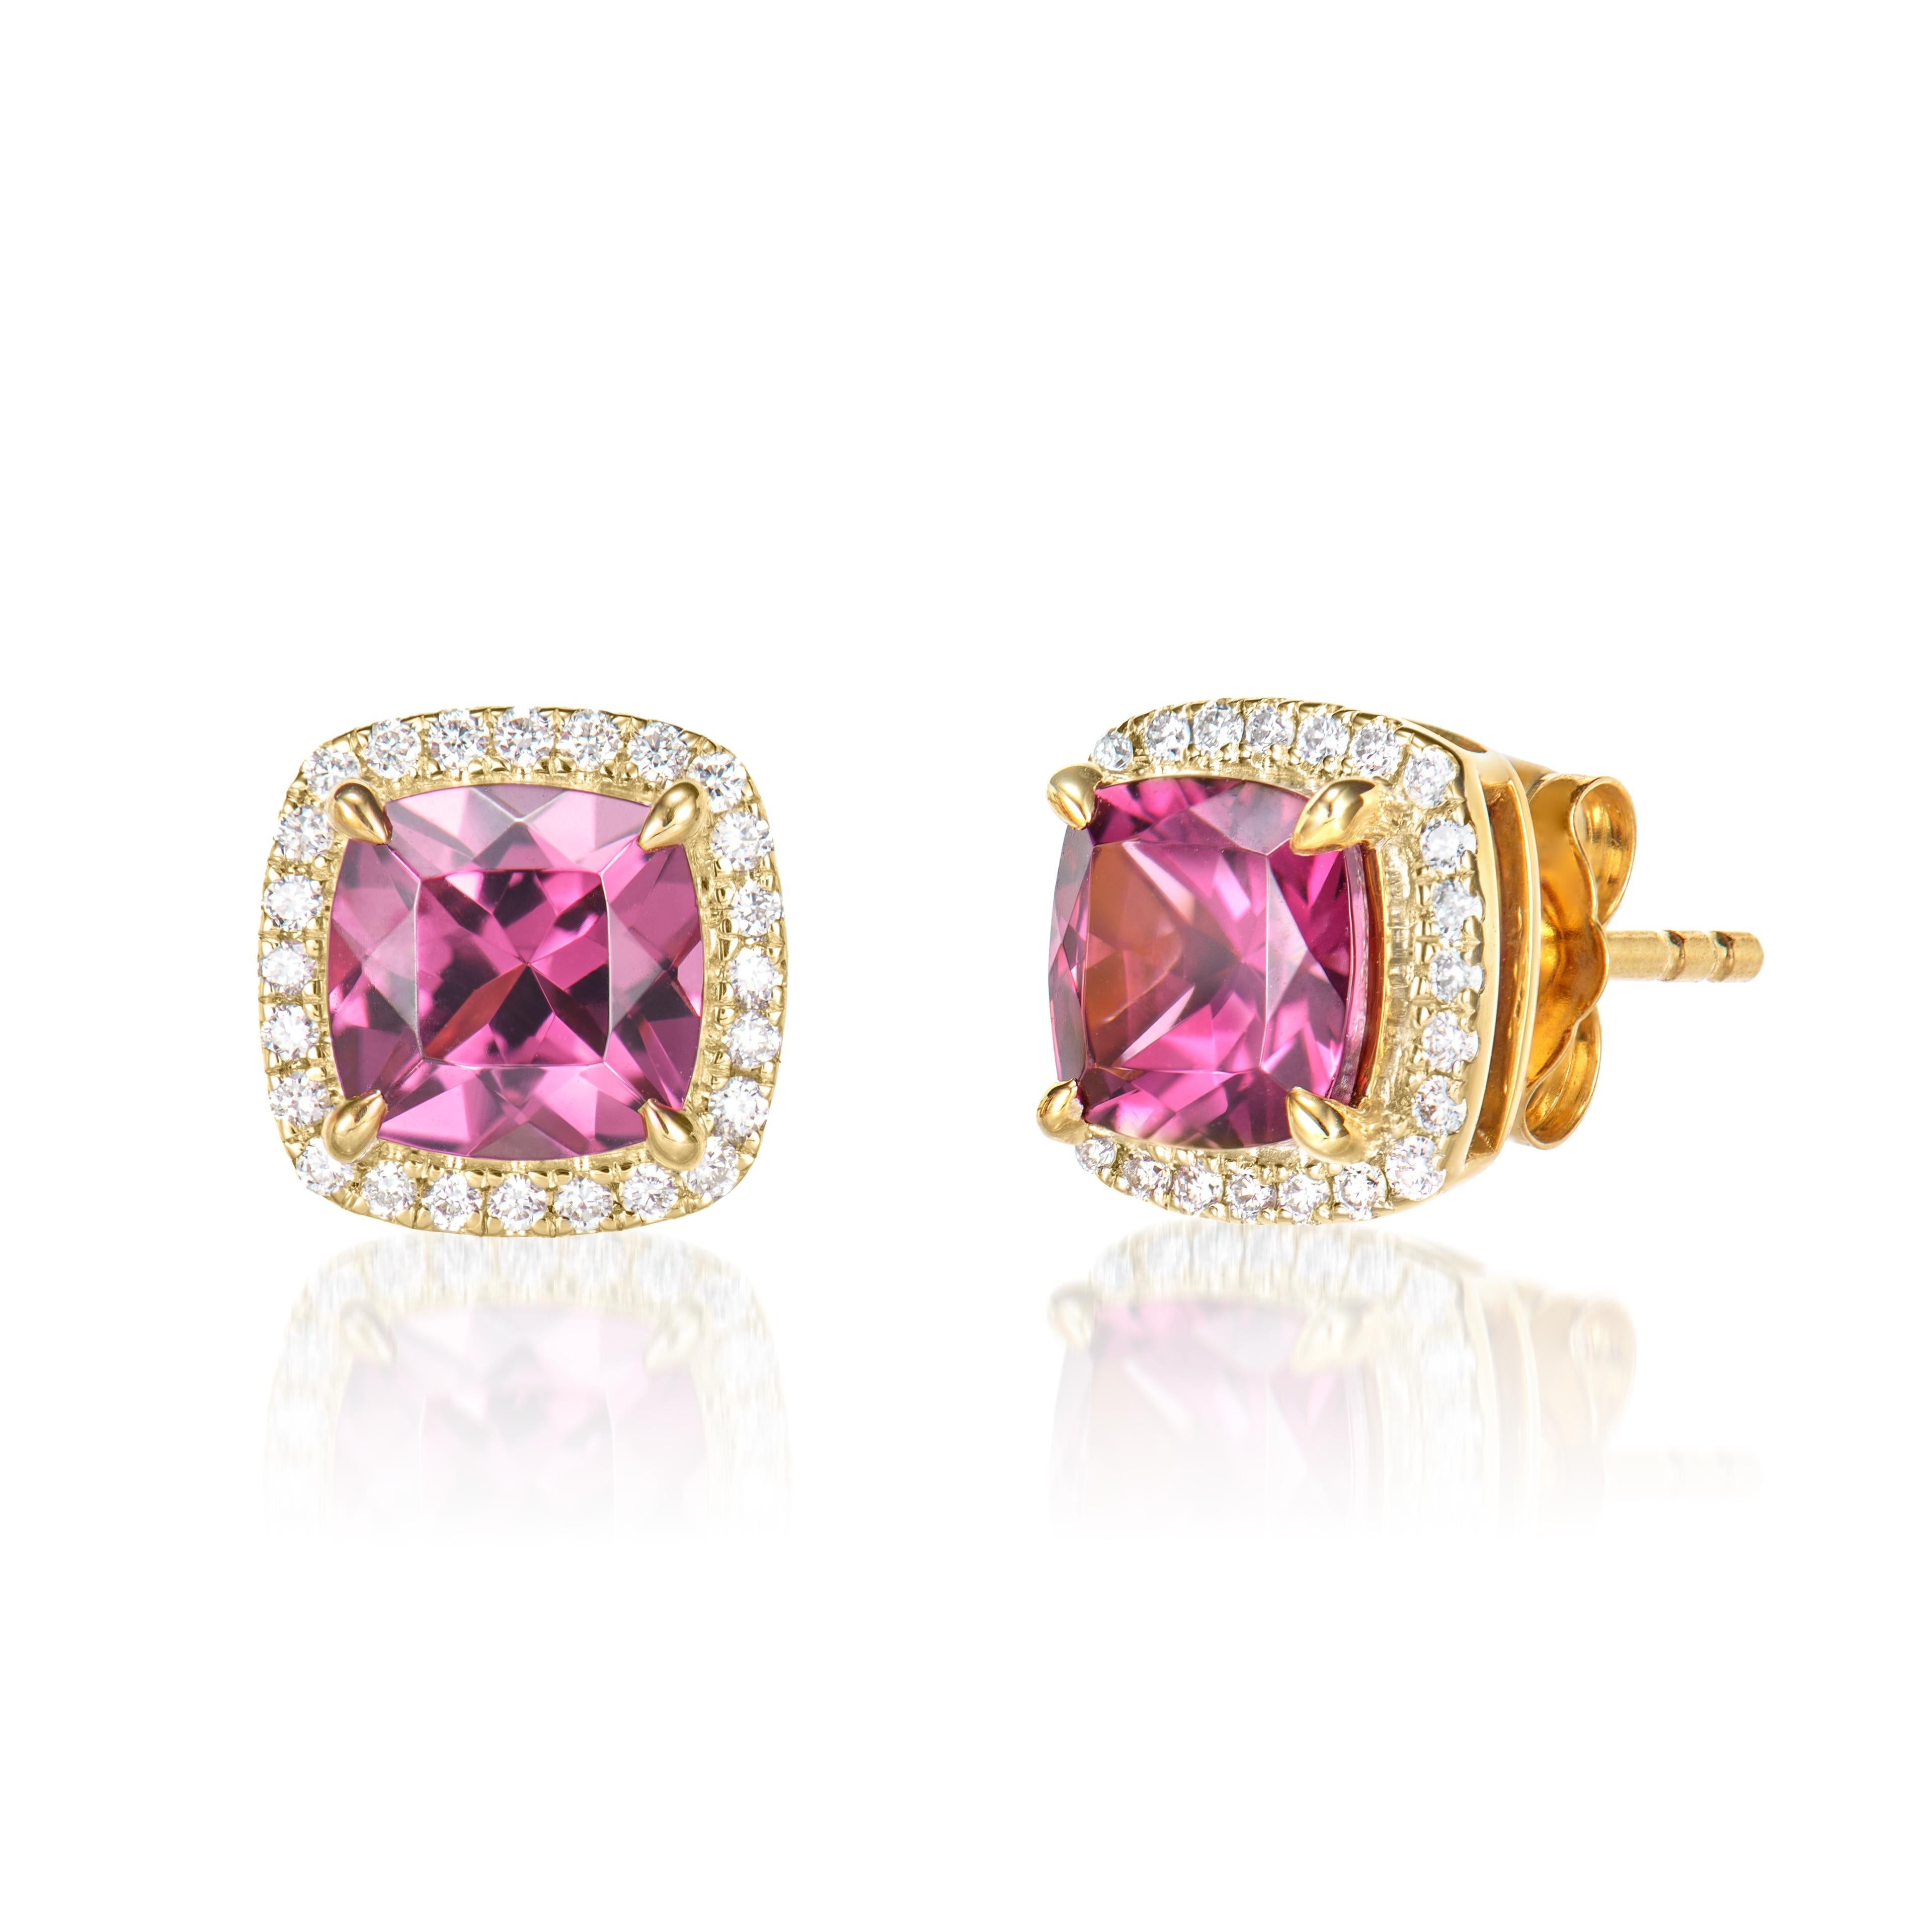 Cushion Cut 2.39 Carat Rhodolite Stud Earrings in 18Karat Yellow Gold with White Diamond. For Sale